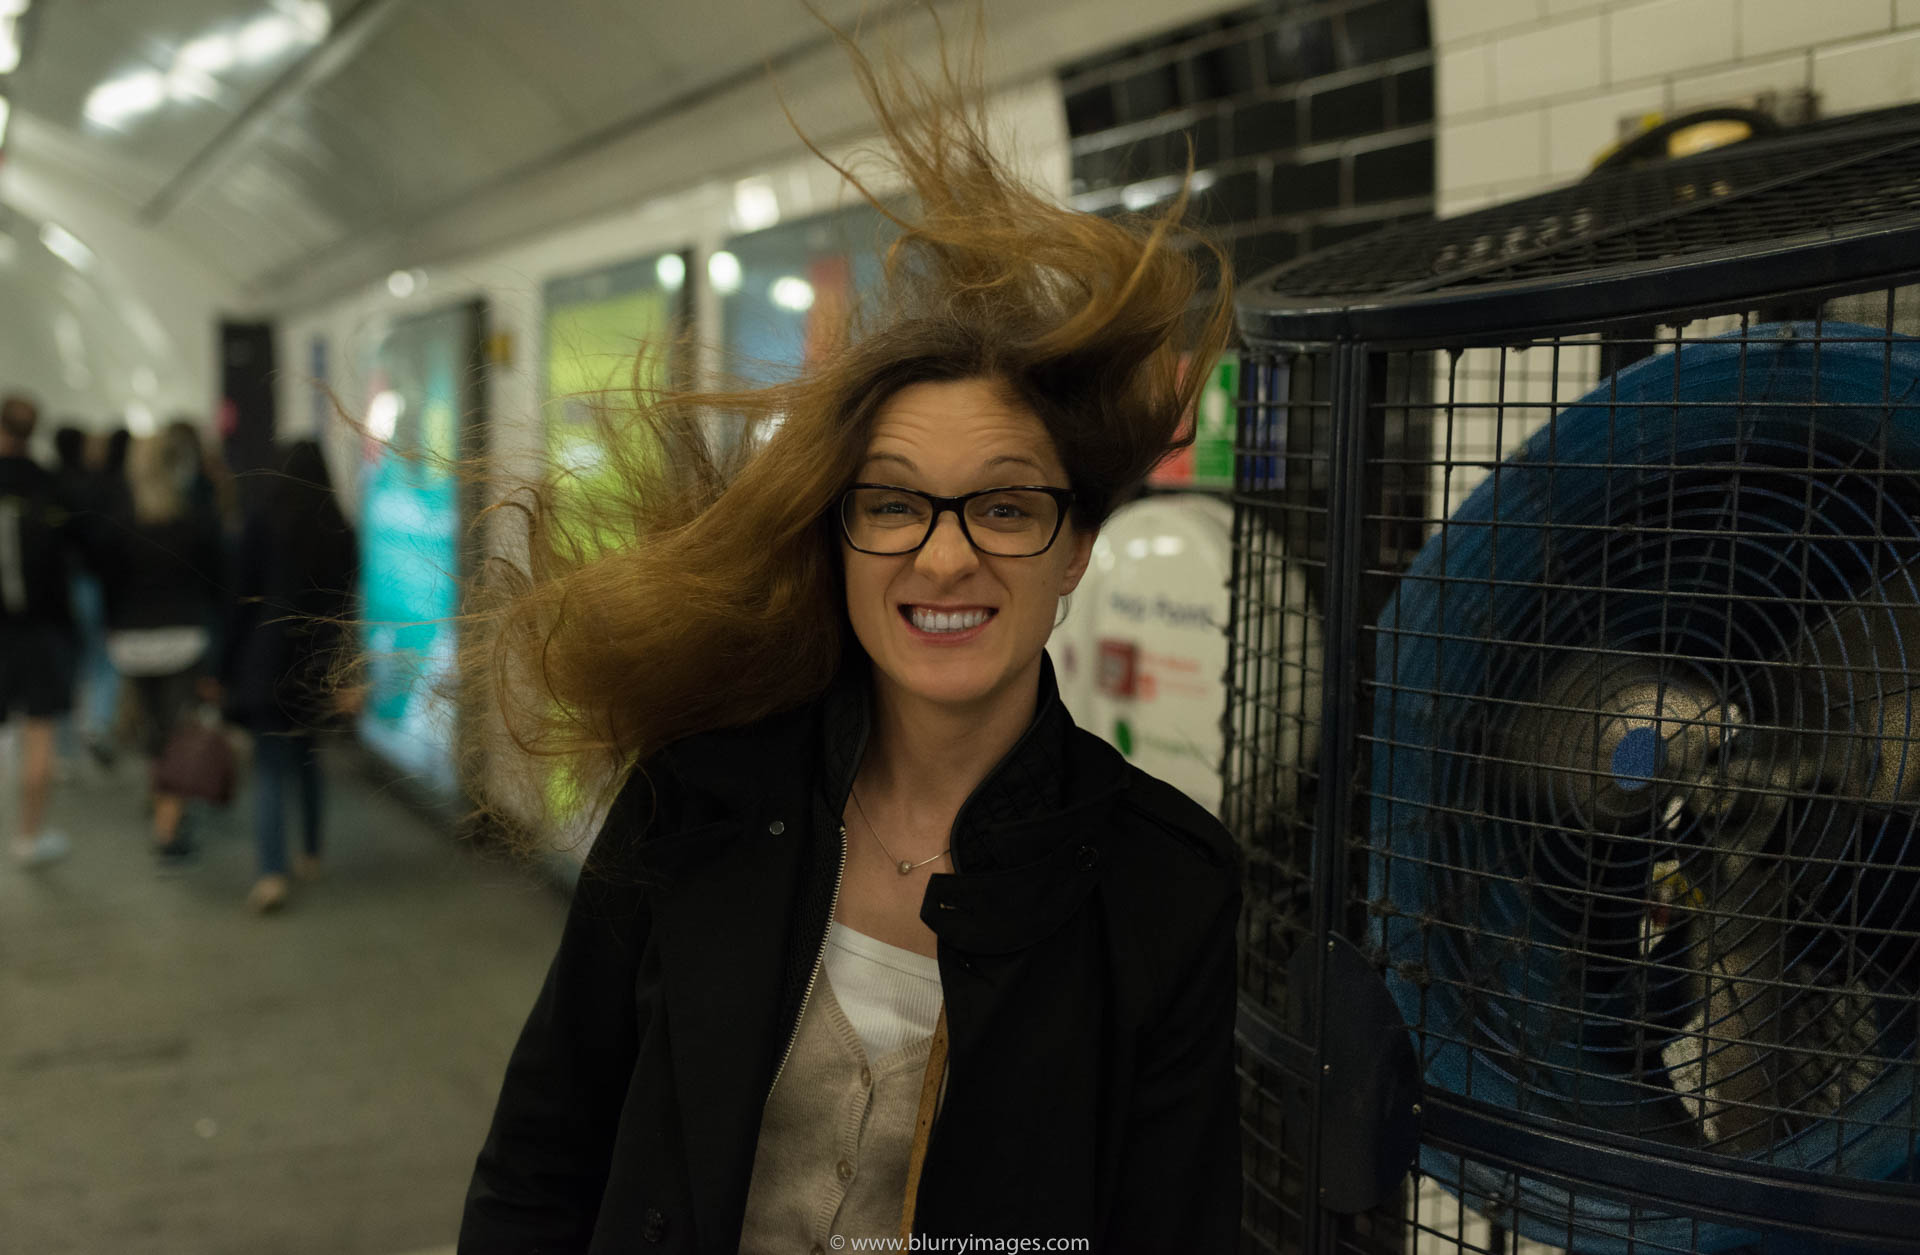 tube station, people, street, woman, tube, fan, real people, London - England, 2016, brown hear, adults only, casual clothing, colour image, portrait, long hair, young adult, headshot, Europe, England, black jacket, brown hair, blue fan, curly hair, blowing, indoors, 2016, Tube station, blurry background